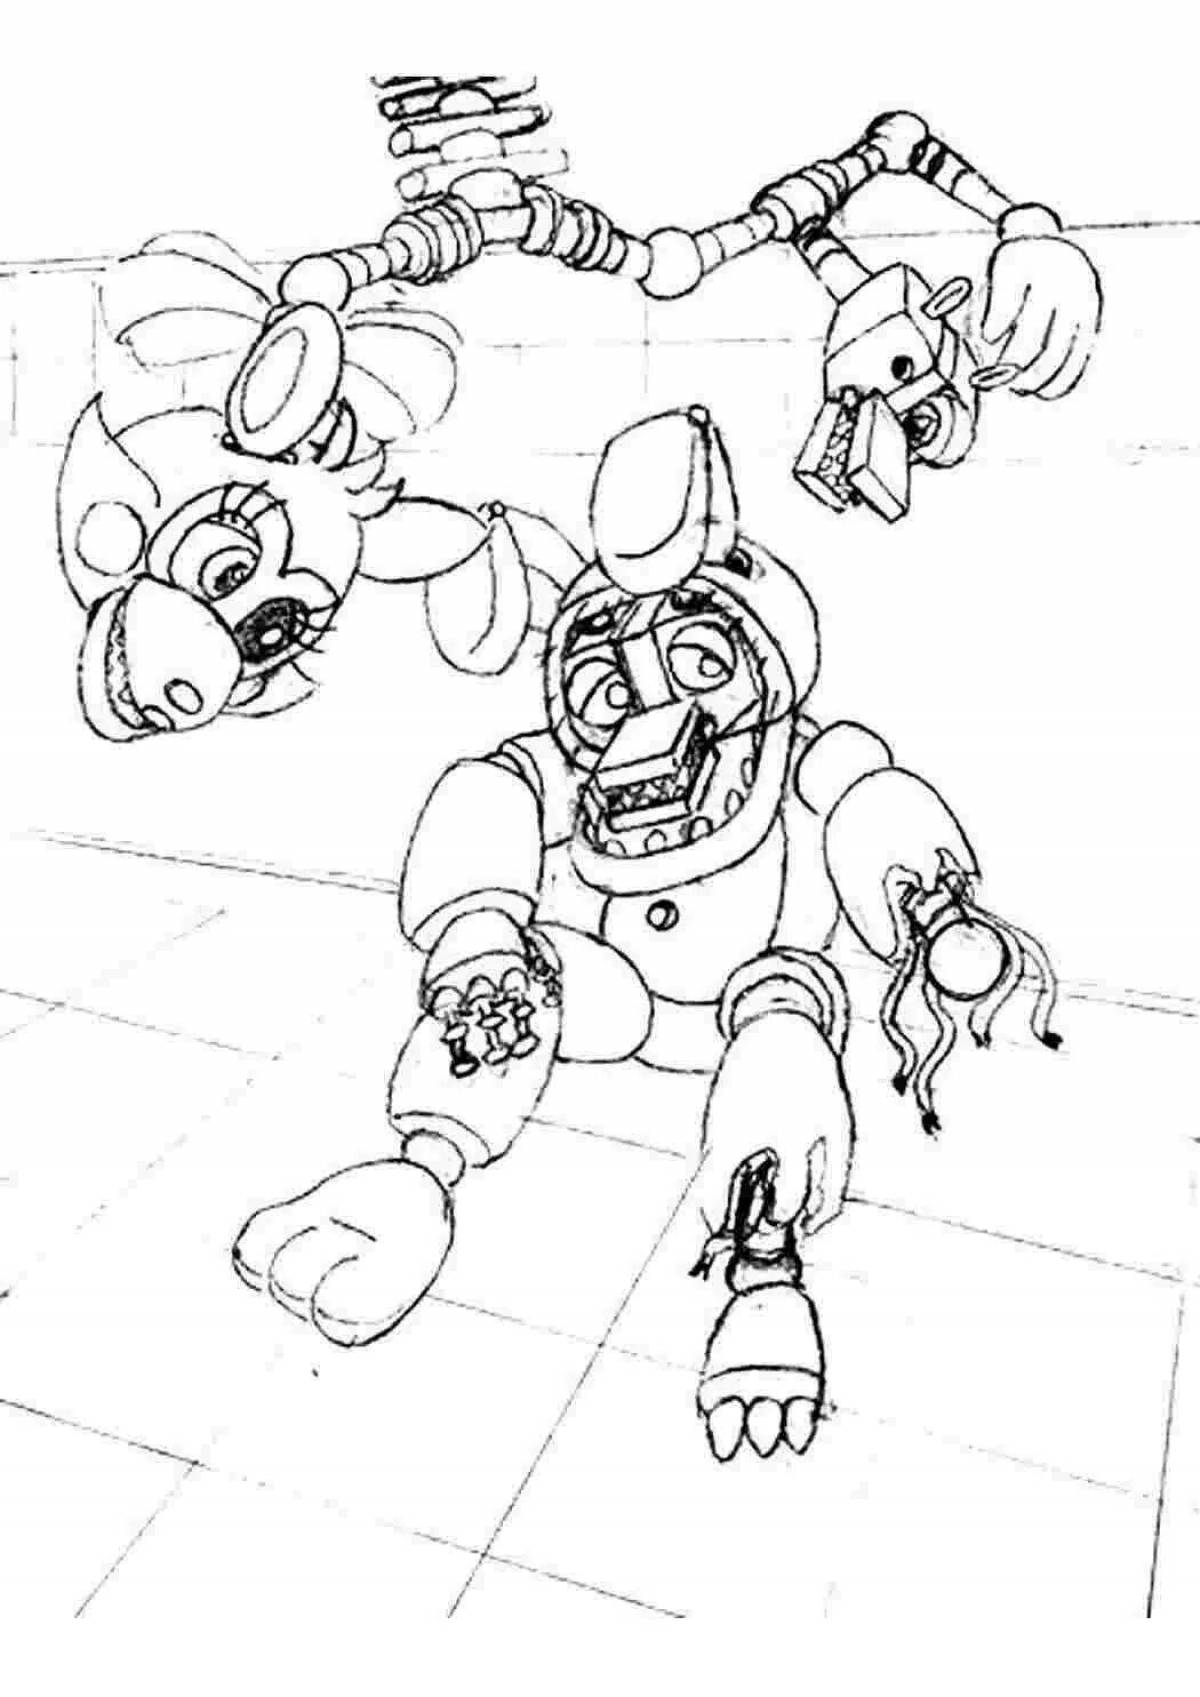 Rockstar bonnie's exciting coloring book